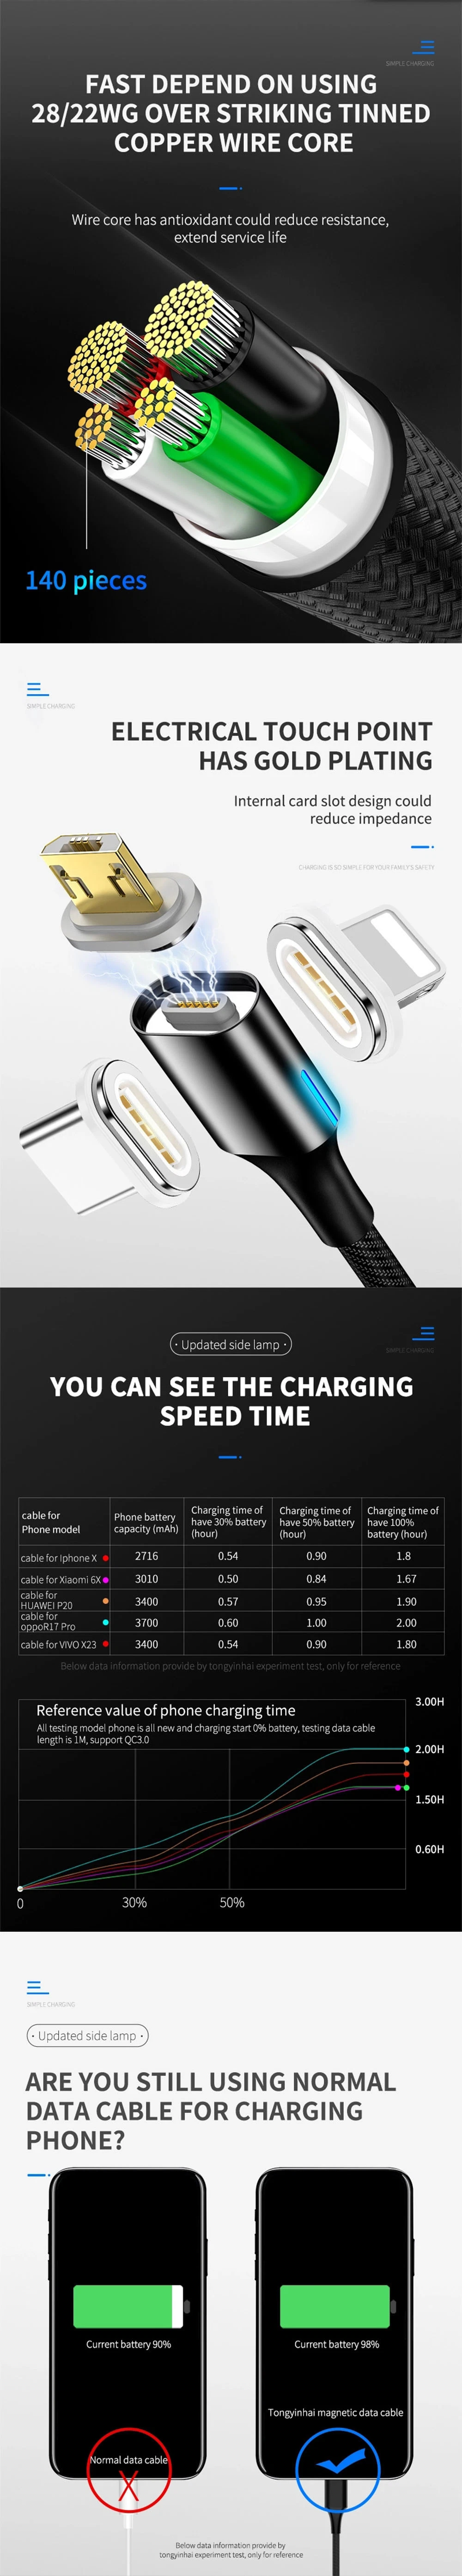 Rt-Mc16 3 in 1 Magnetic Micro USB Type C Lighting Fast Charging Cable